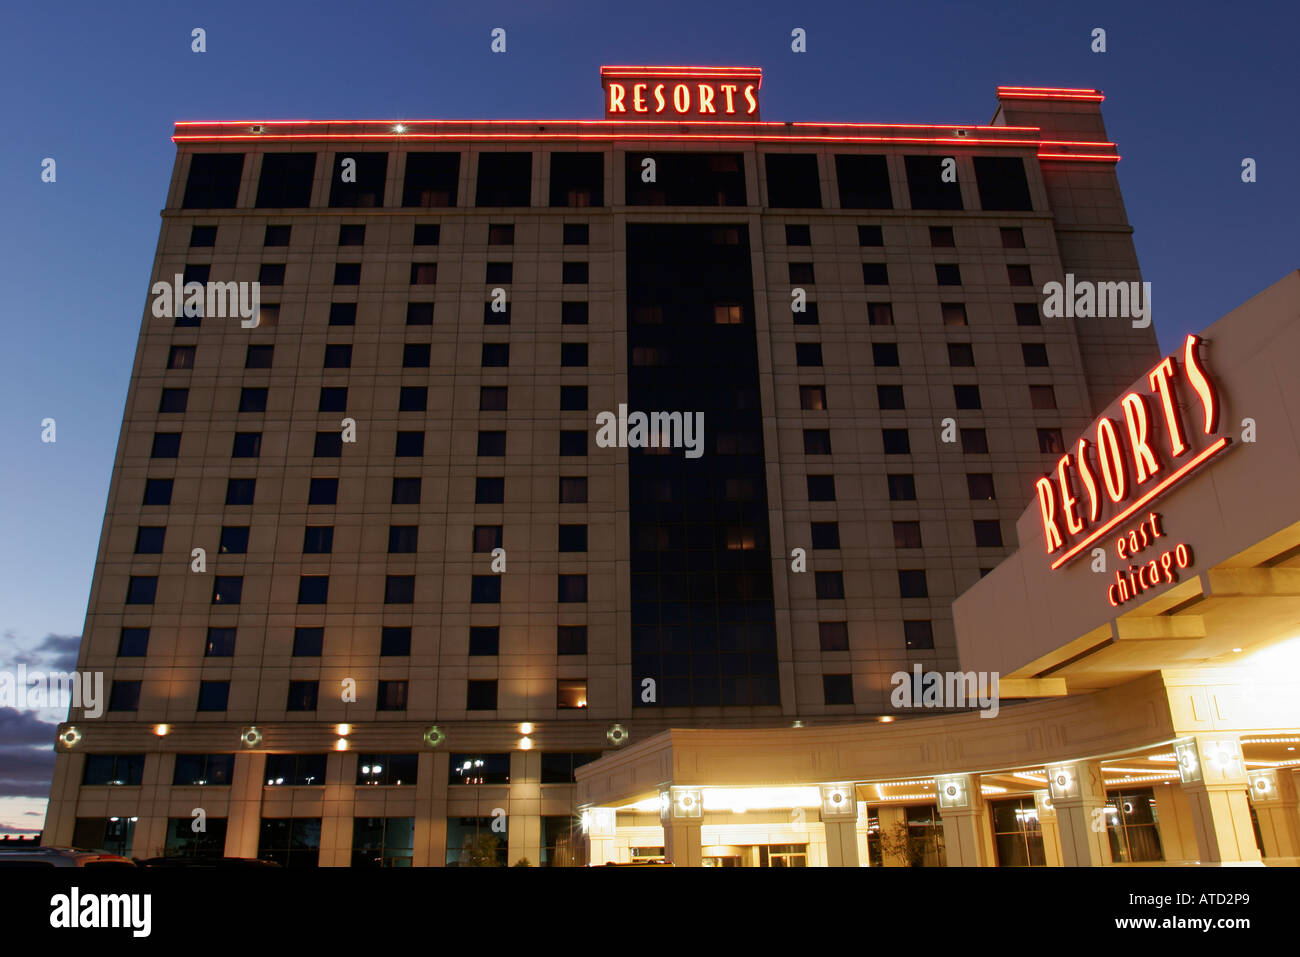 Indiana Lake County,Gary,Resorts East Chicago,hotel,casino,gamble,gambling,night evening,social,entertainment,performance,show,entertainment,IN0610050 Stock Photo